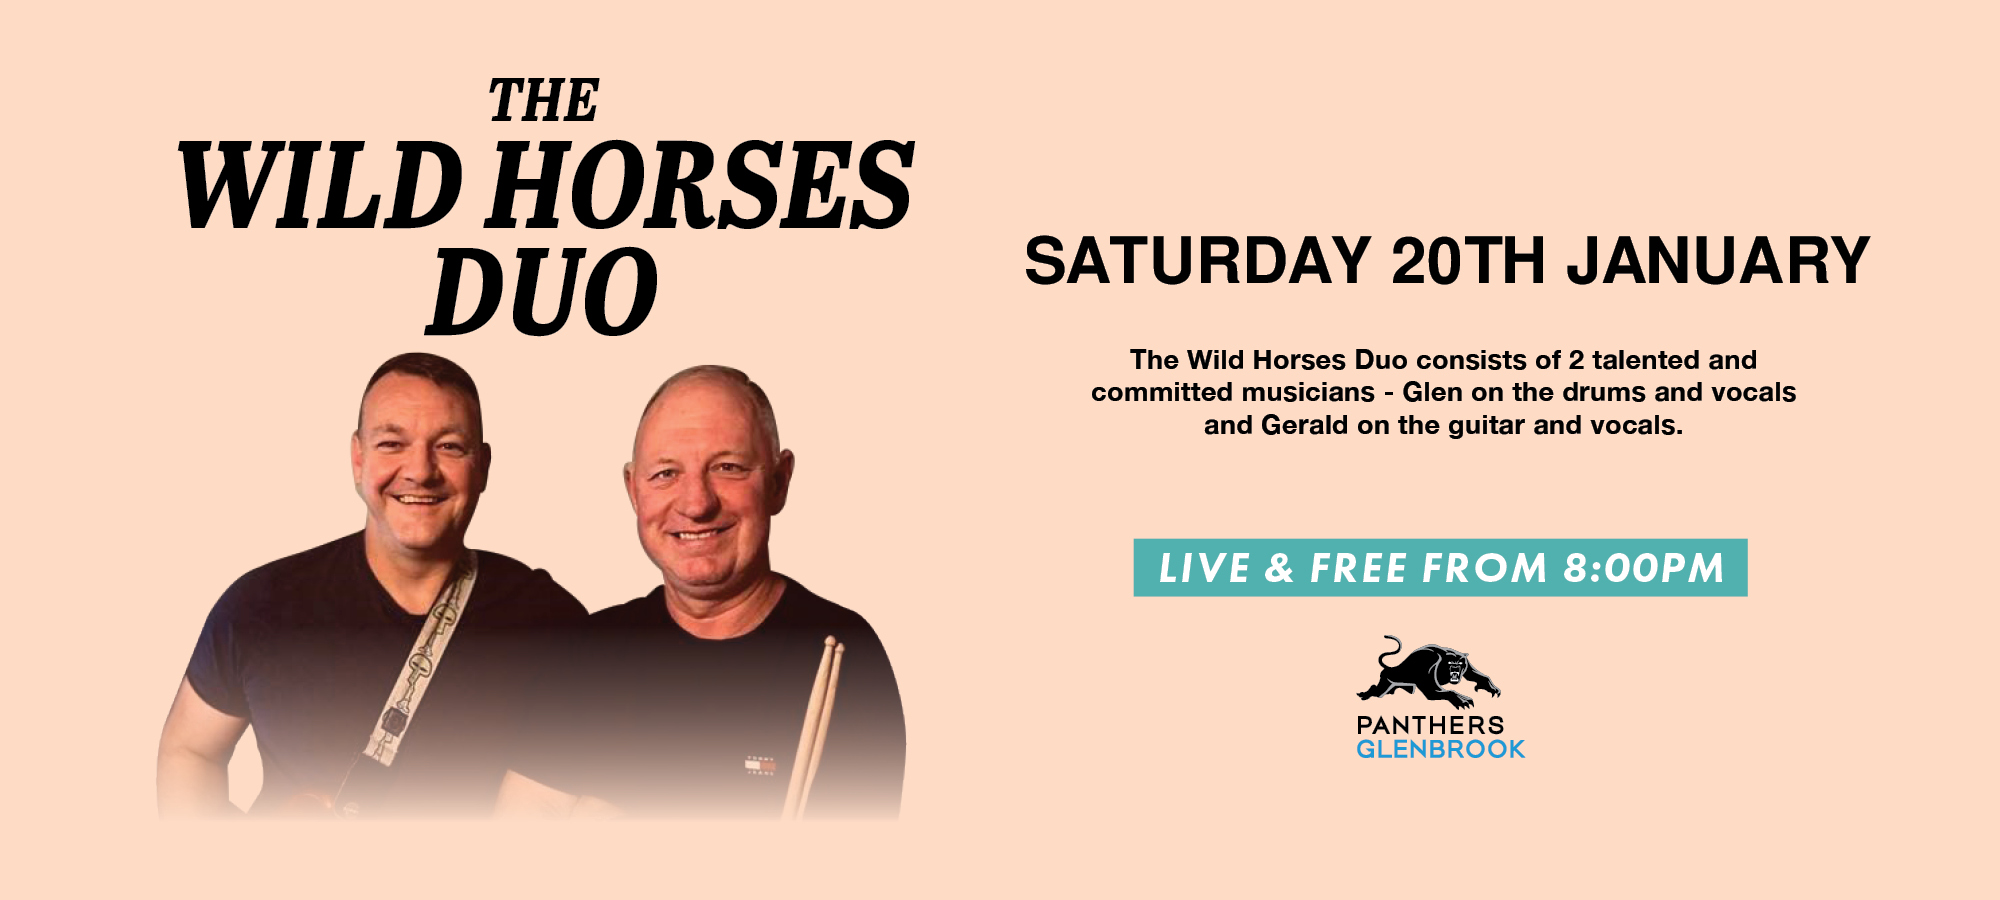 Wild Horses Duo – Saturday Live Entertainment in January